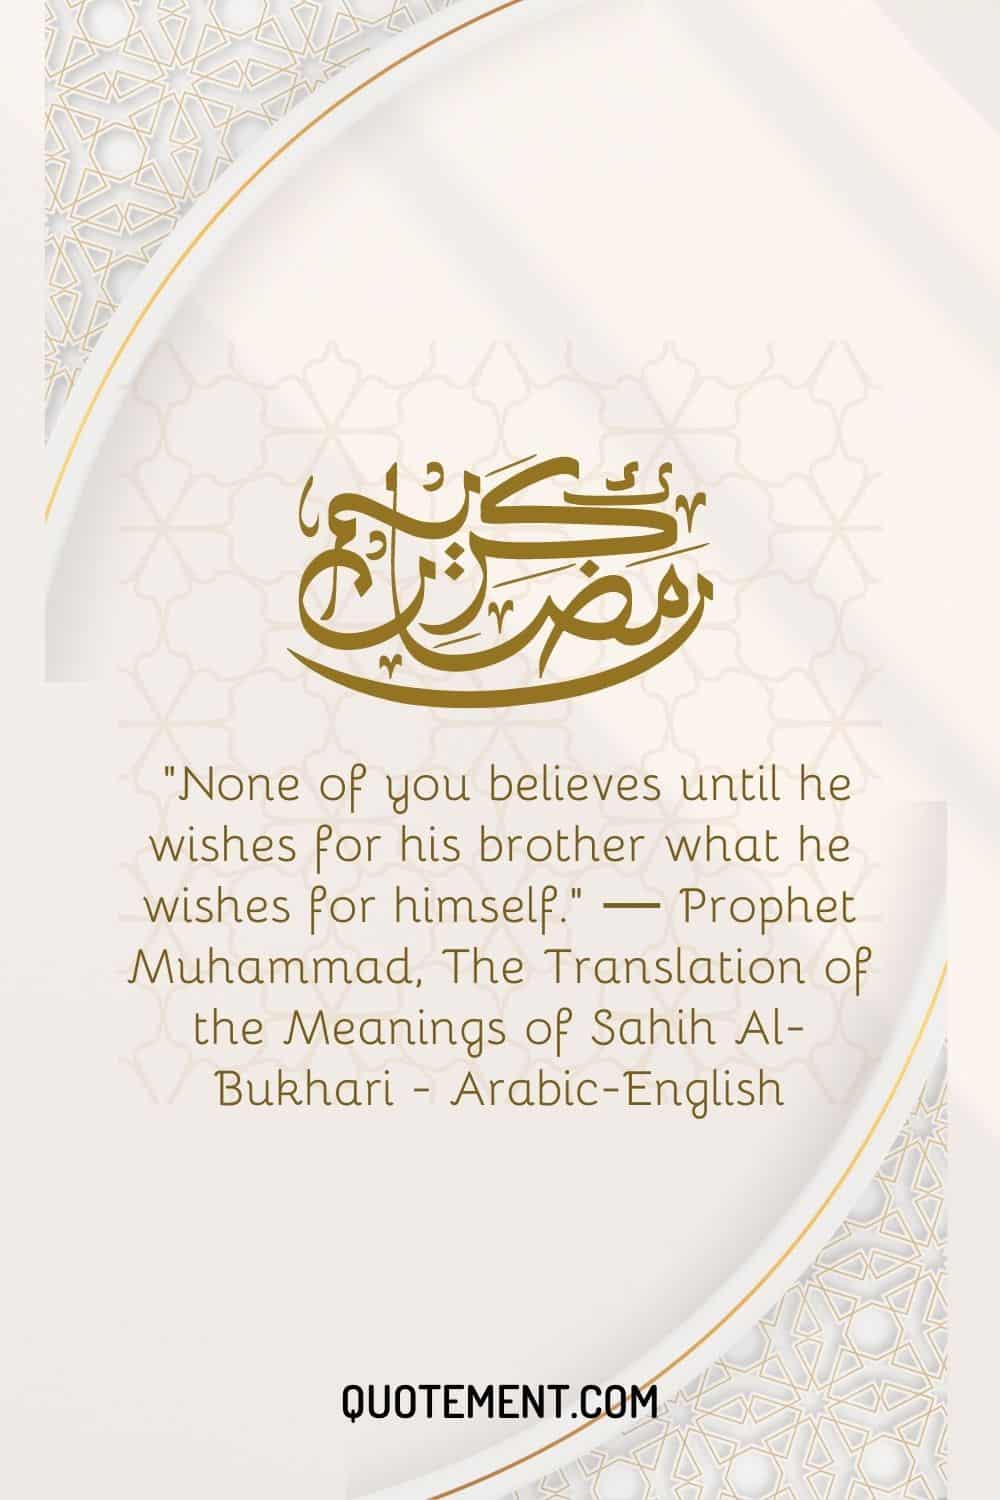 None of you believes until he wishes for his brother what he wishes for himself